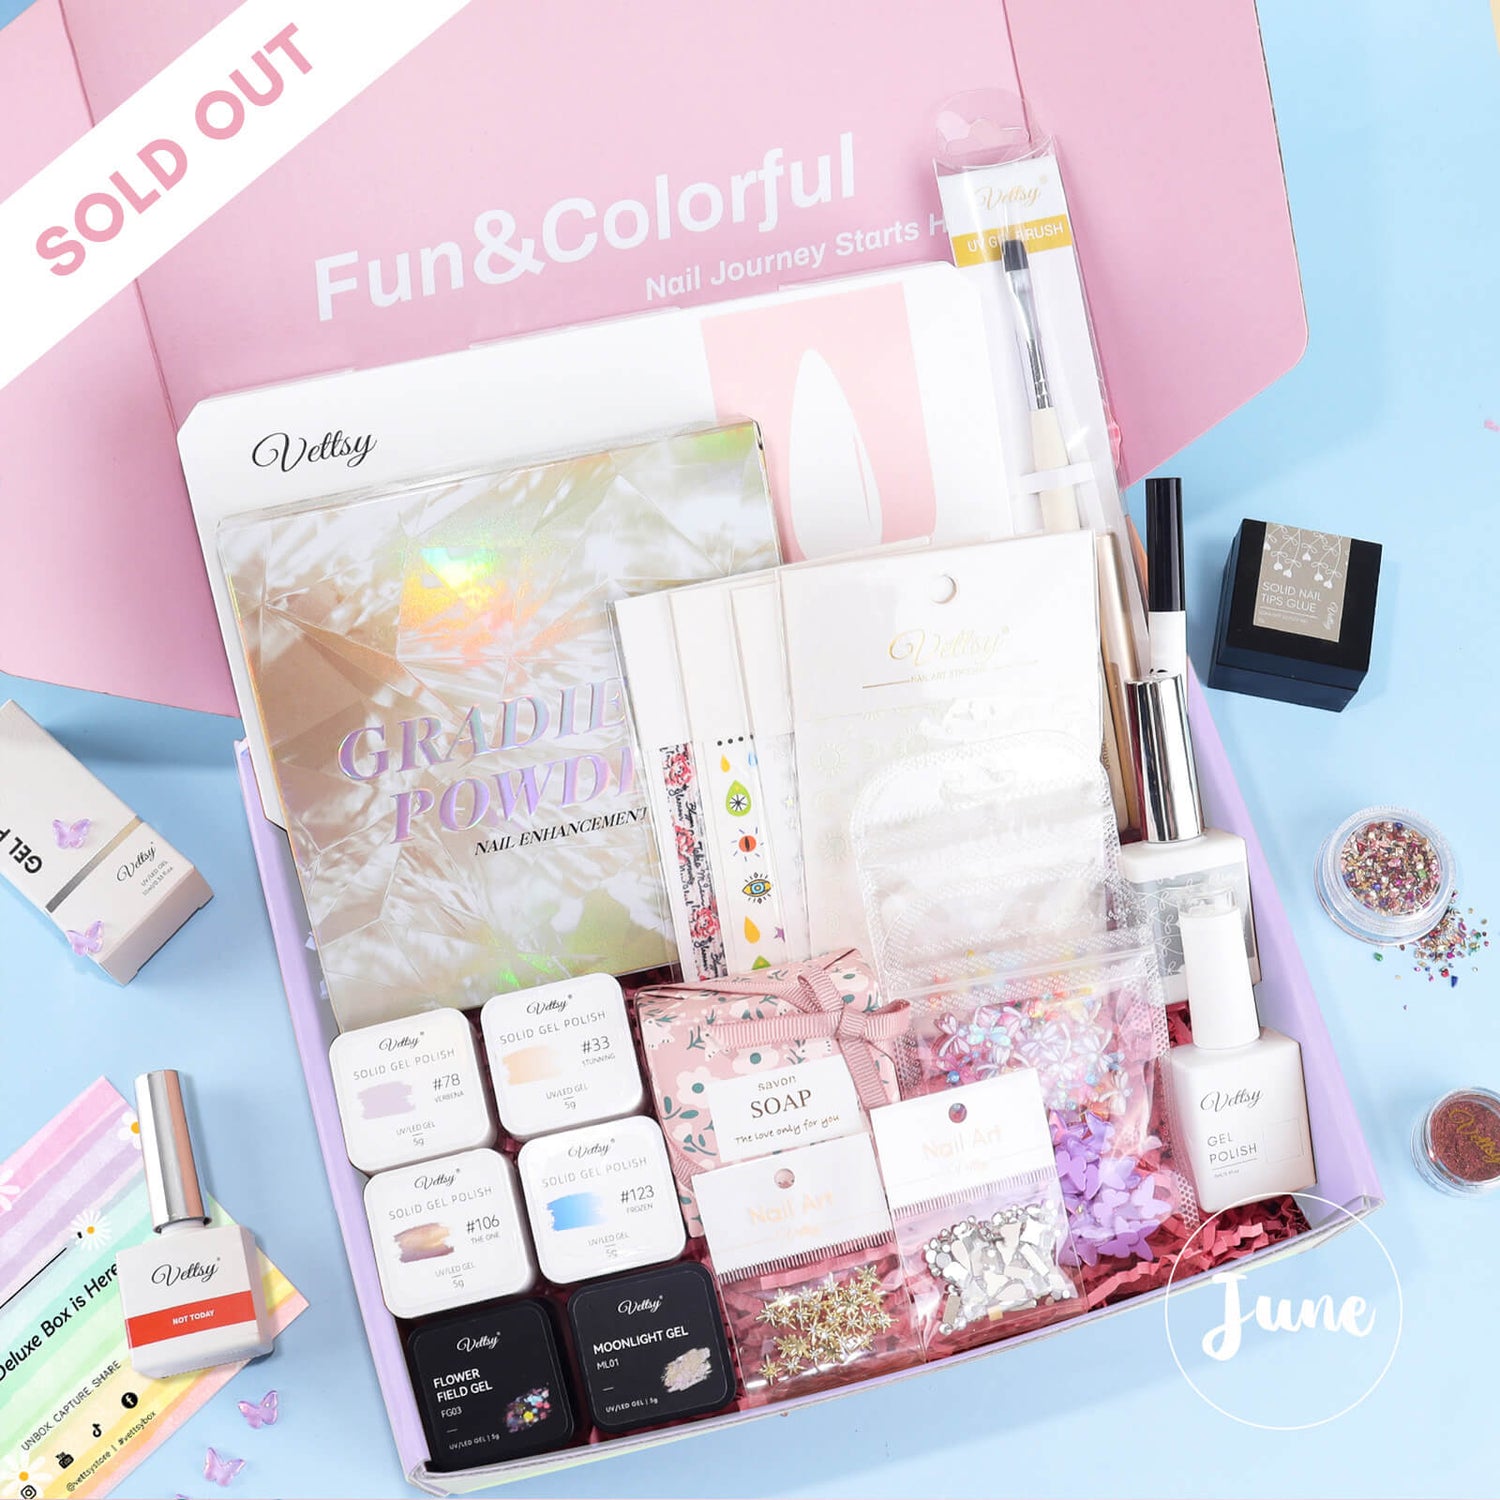 Monthly-subscrption-nail-art-box-June-deluxe-box-sold-out